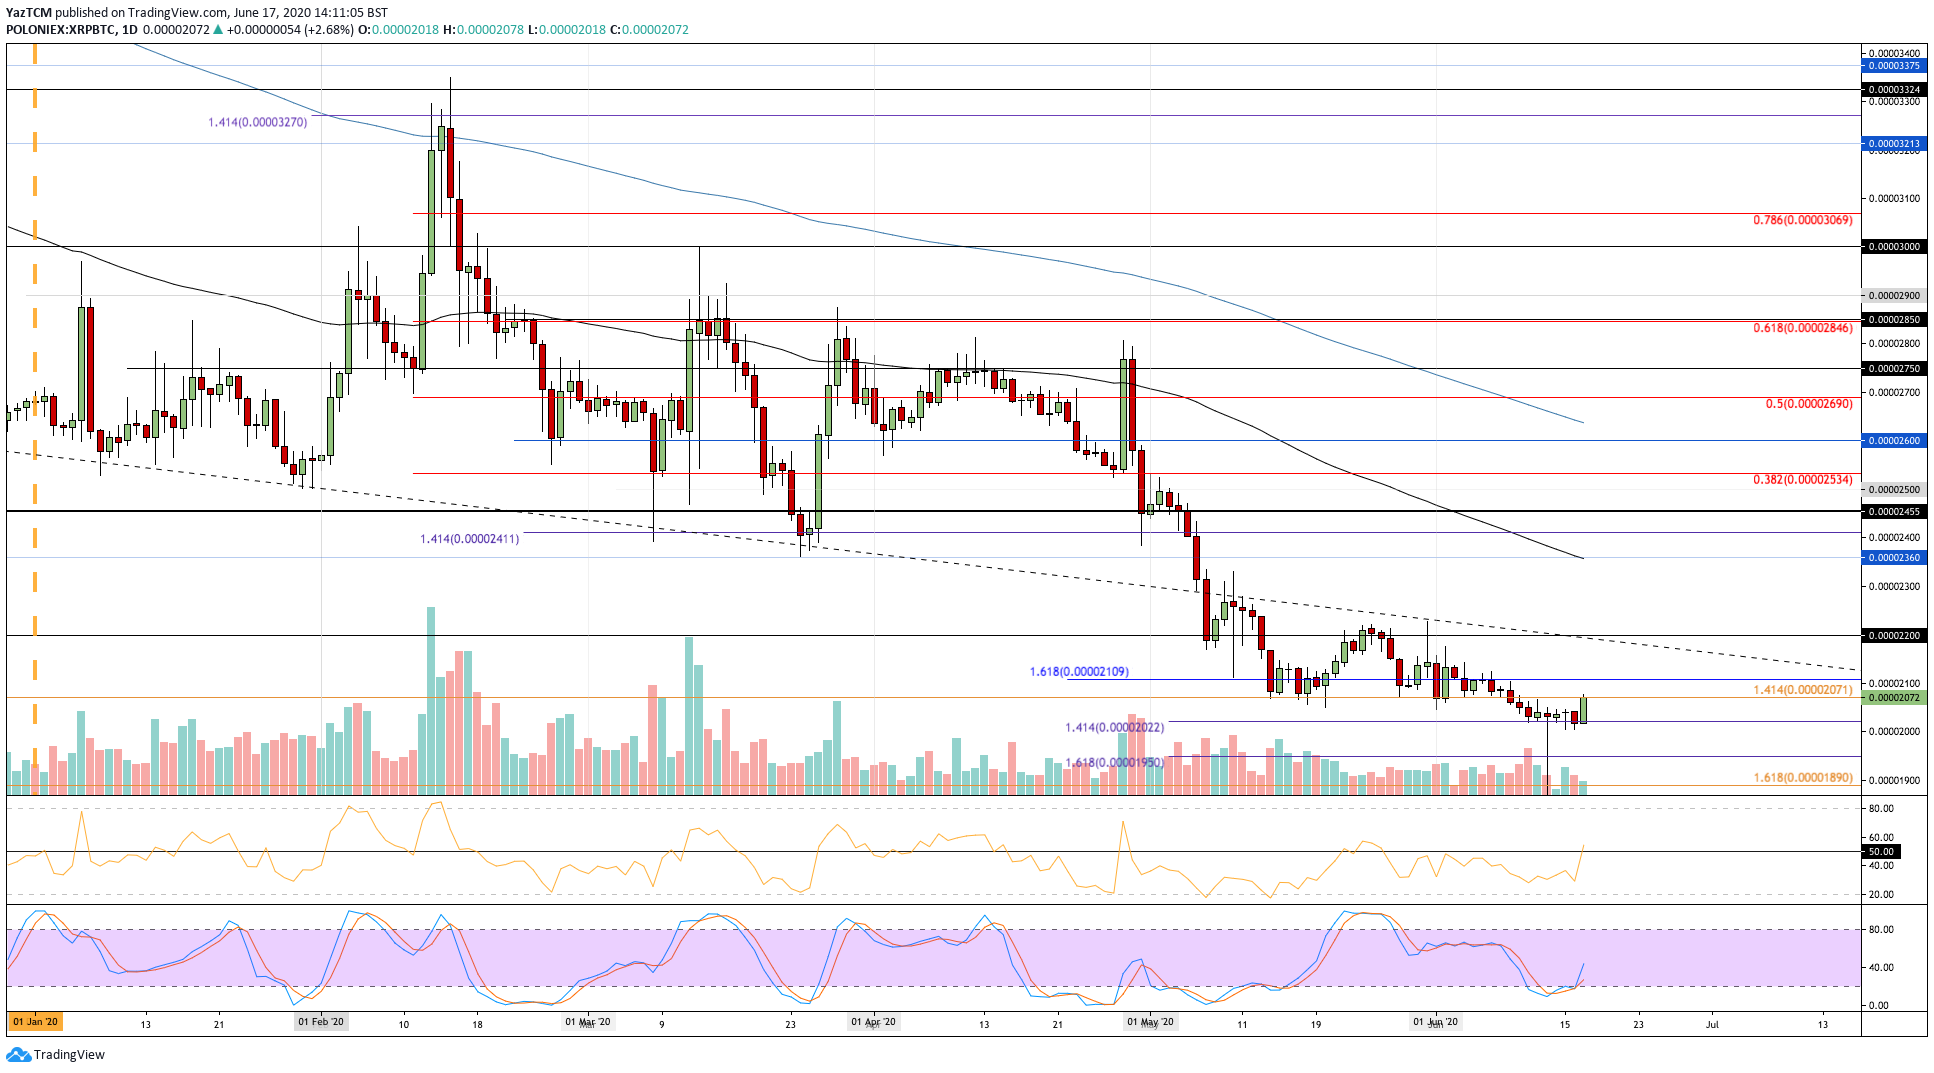 Ripple Price Analysis: XRP Pushing To $0.20 But Descending Triangle Still in Play